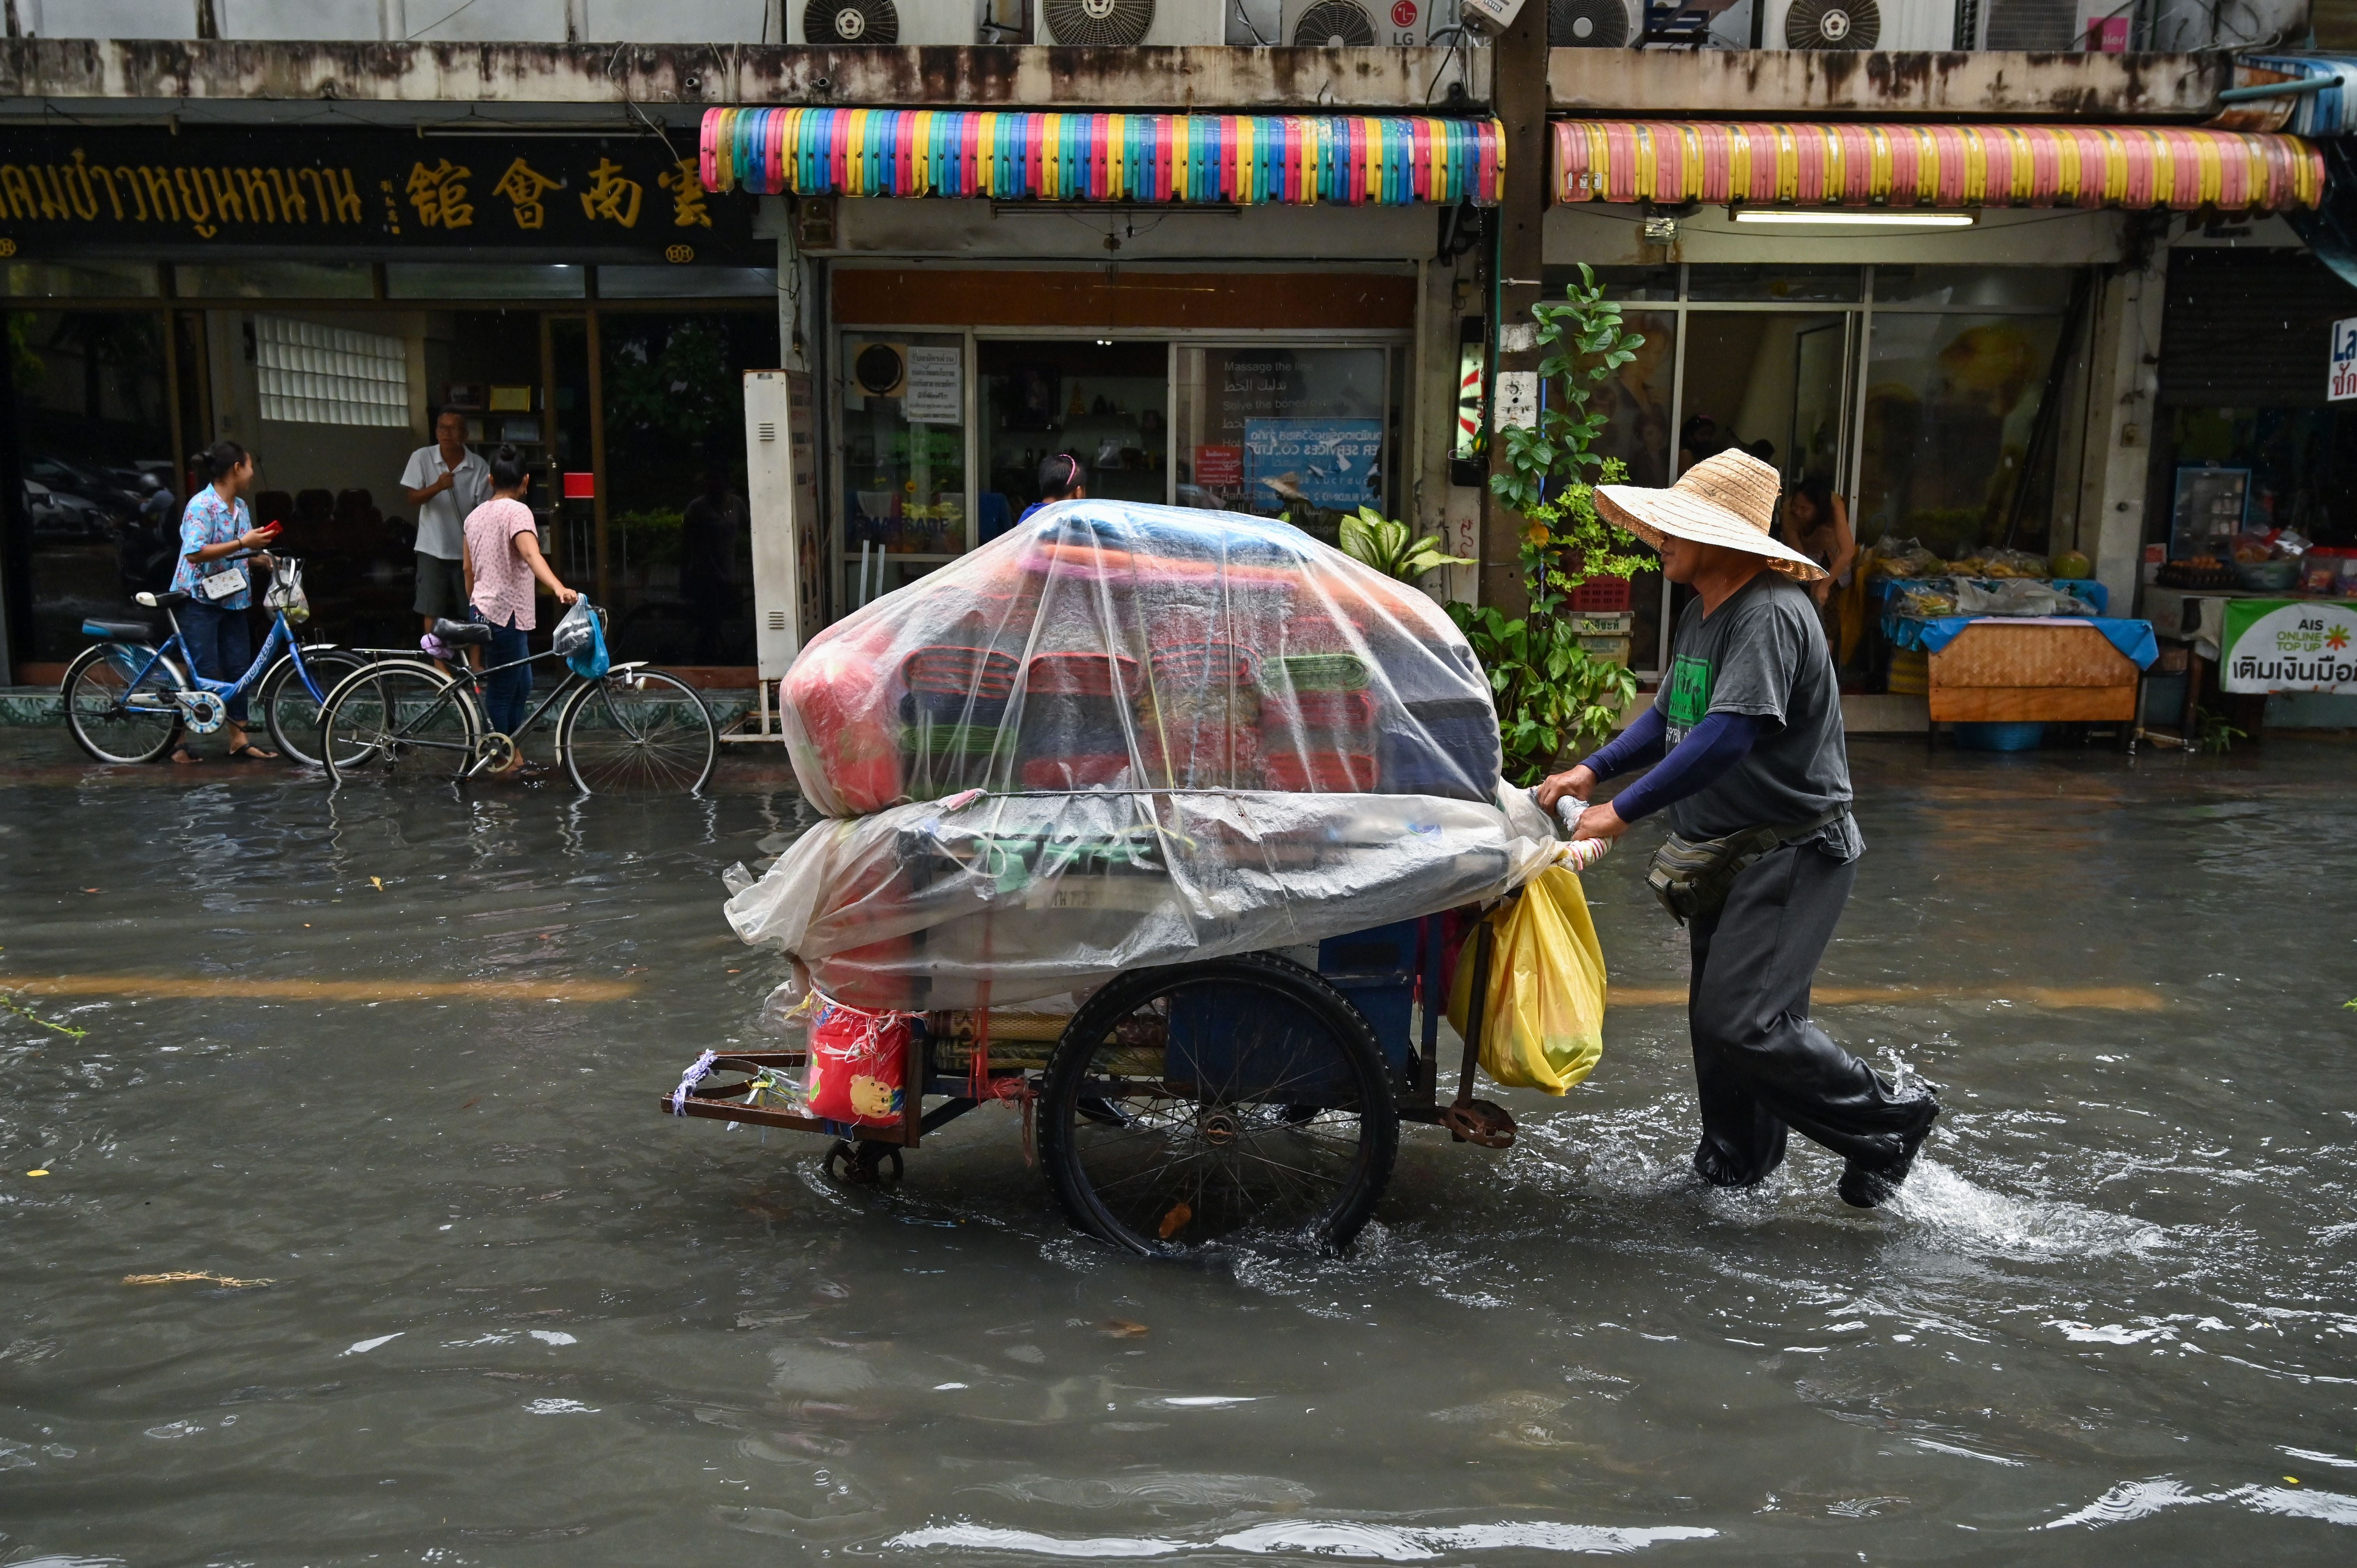 Bangkok is being hit by the effects of climate change